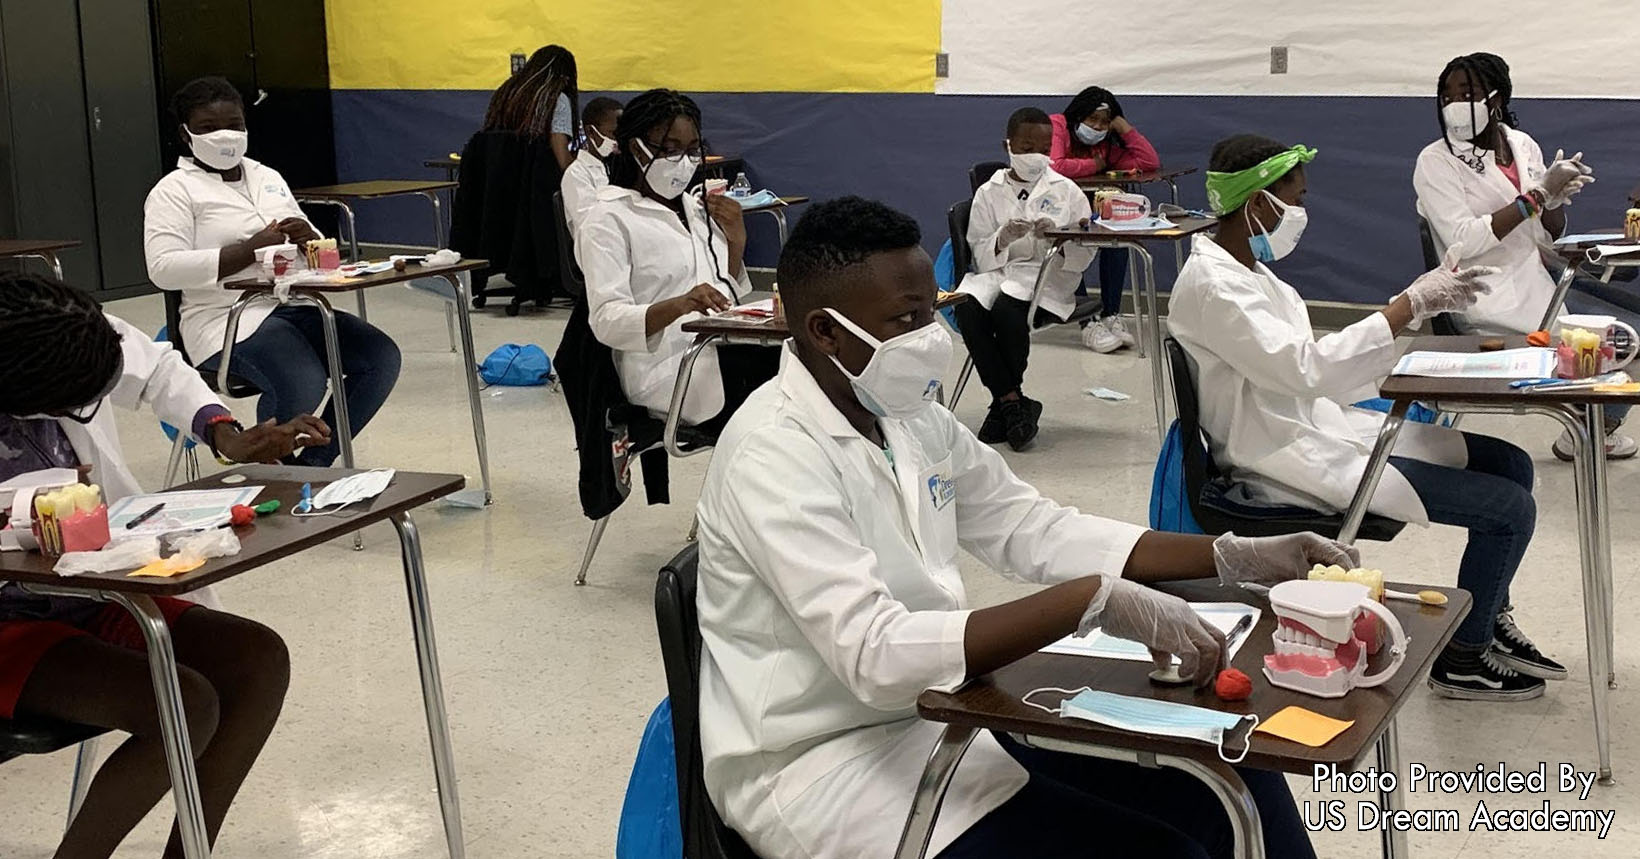 Kids learn what cavities look like and work on brushing techniques during a dental class from U.S. Dream Academy.